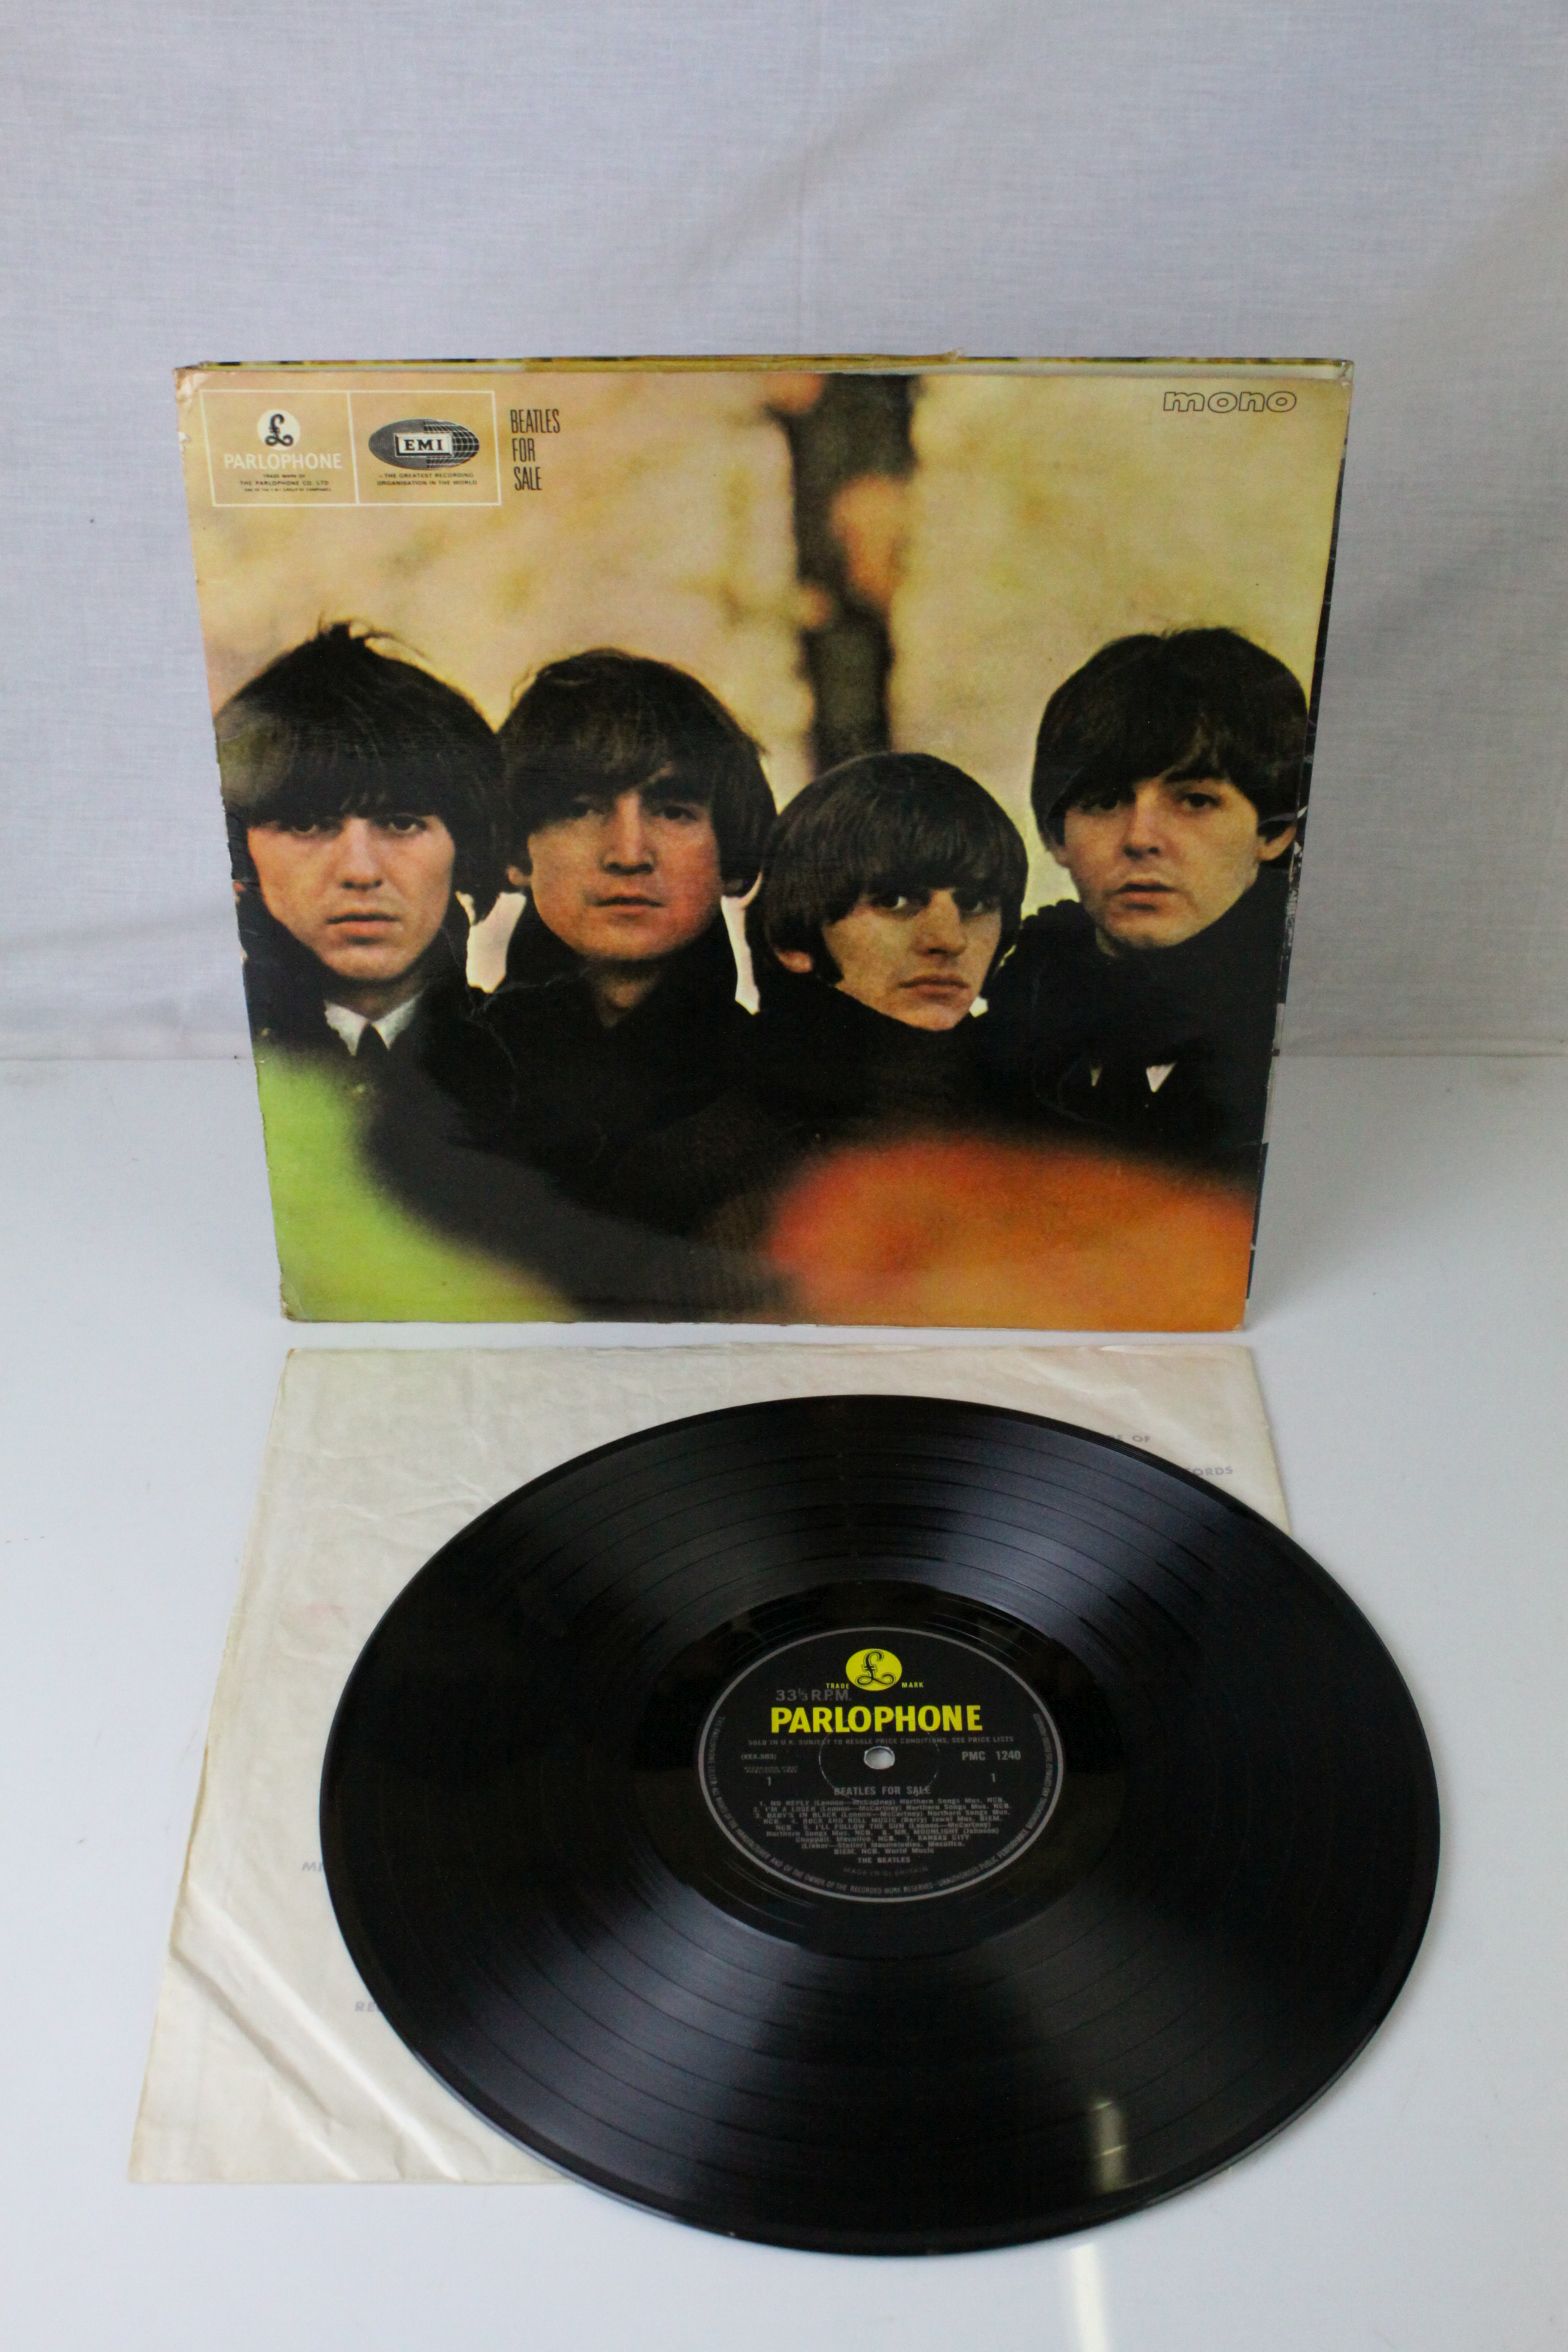 Vinyl - Four The Beatles LPs to include For Sale PMC1240 mono, Revolver PMC7009 mono, With The - Image 17 of 21